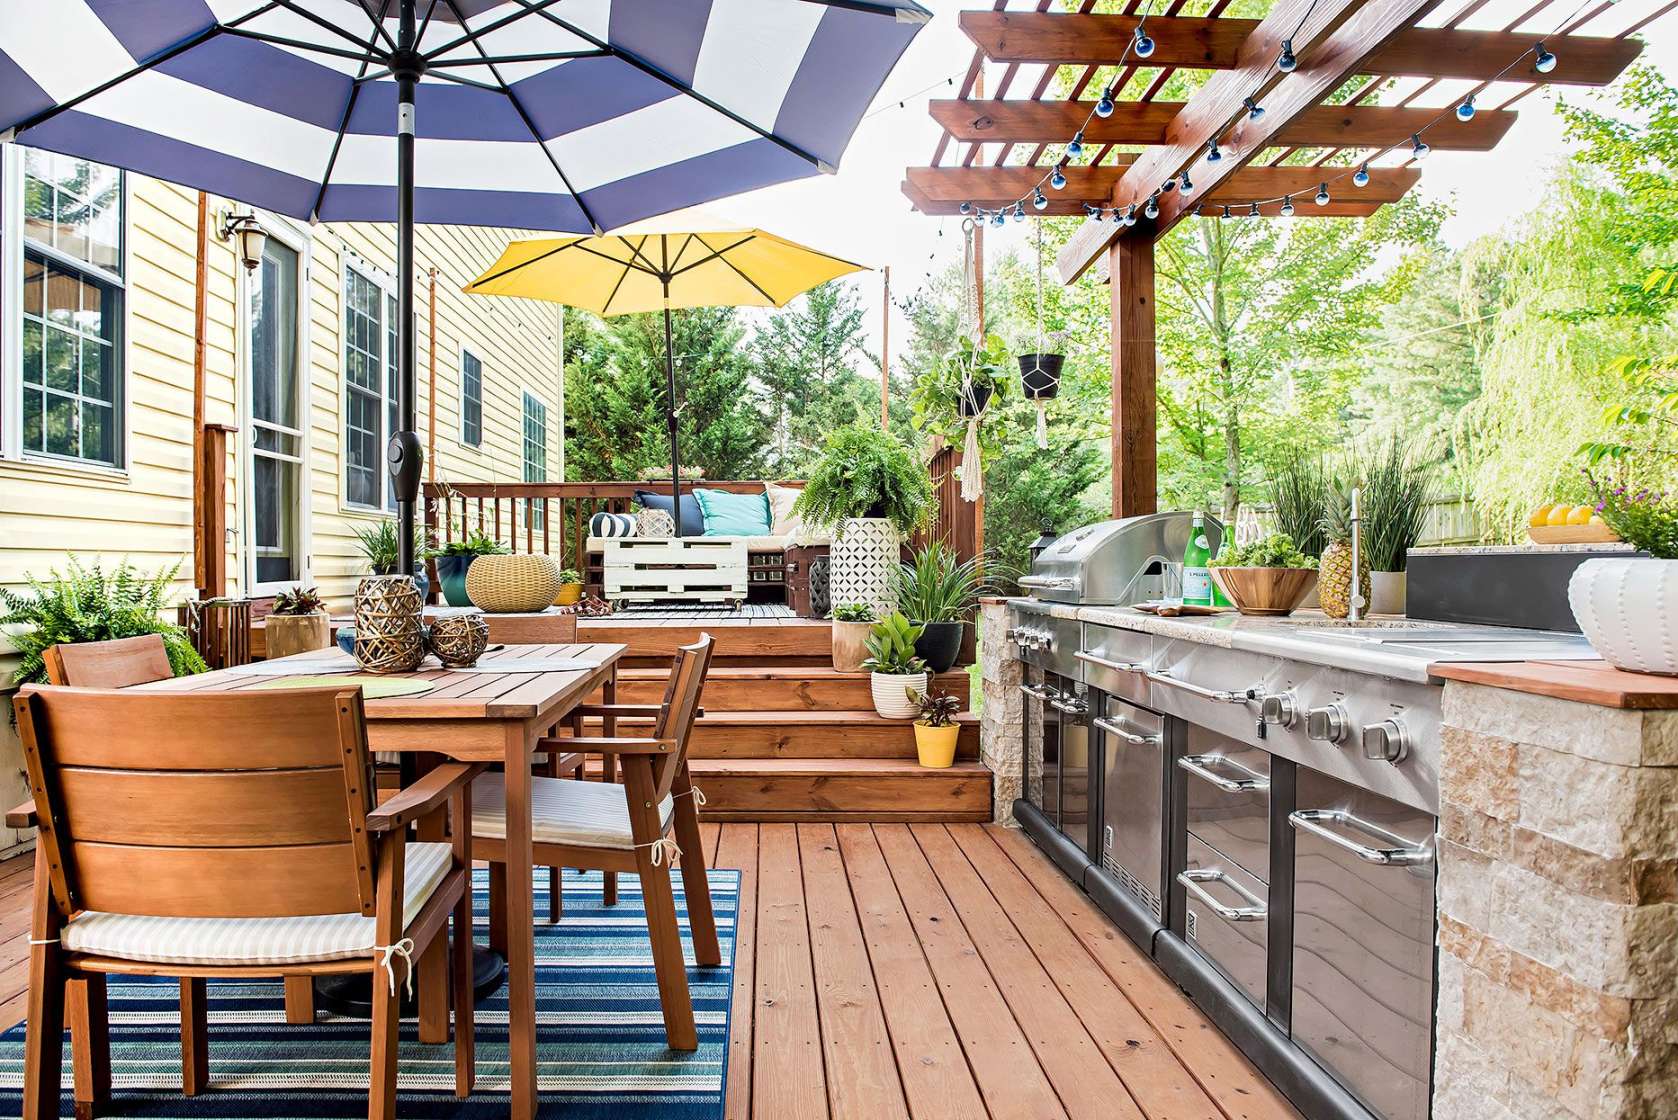 Outdoor Kitchen Ideas Perfect for Entertaining